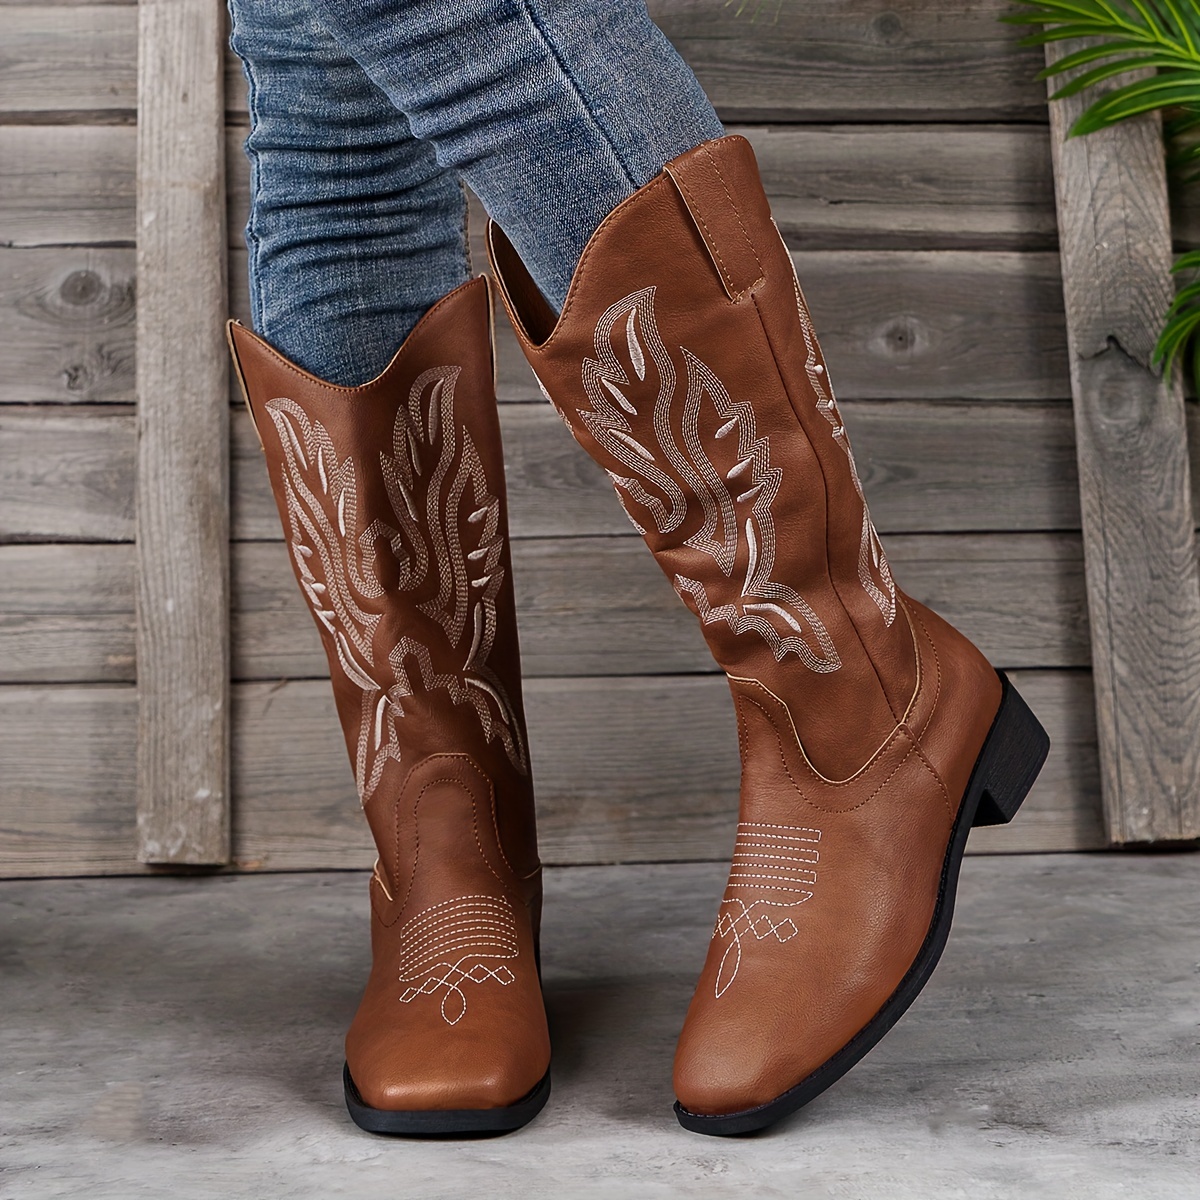 WOMENS COWGIRL Cowboy Square Toe Leather Western Embroidered BOOTS